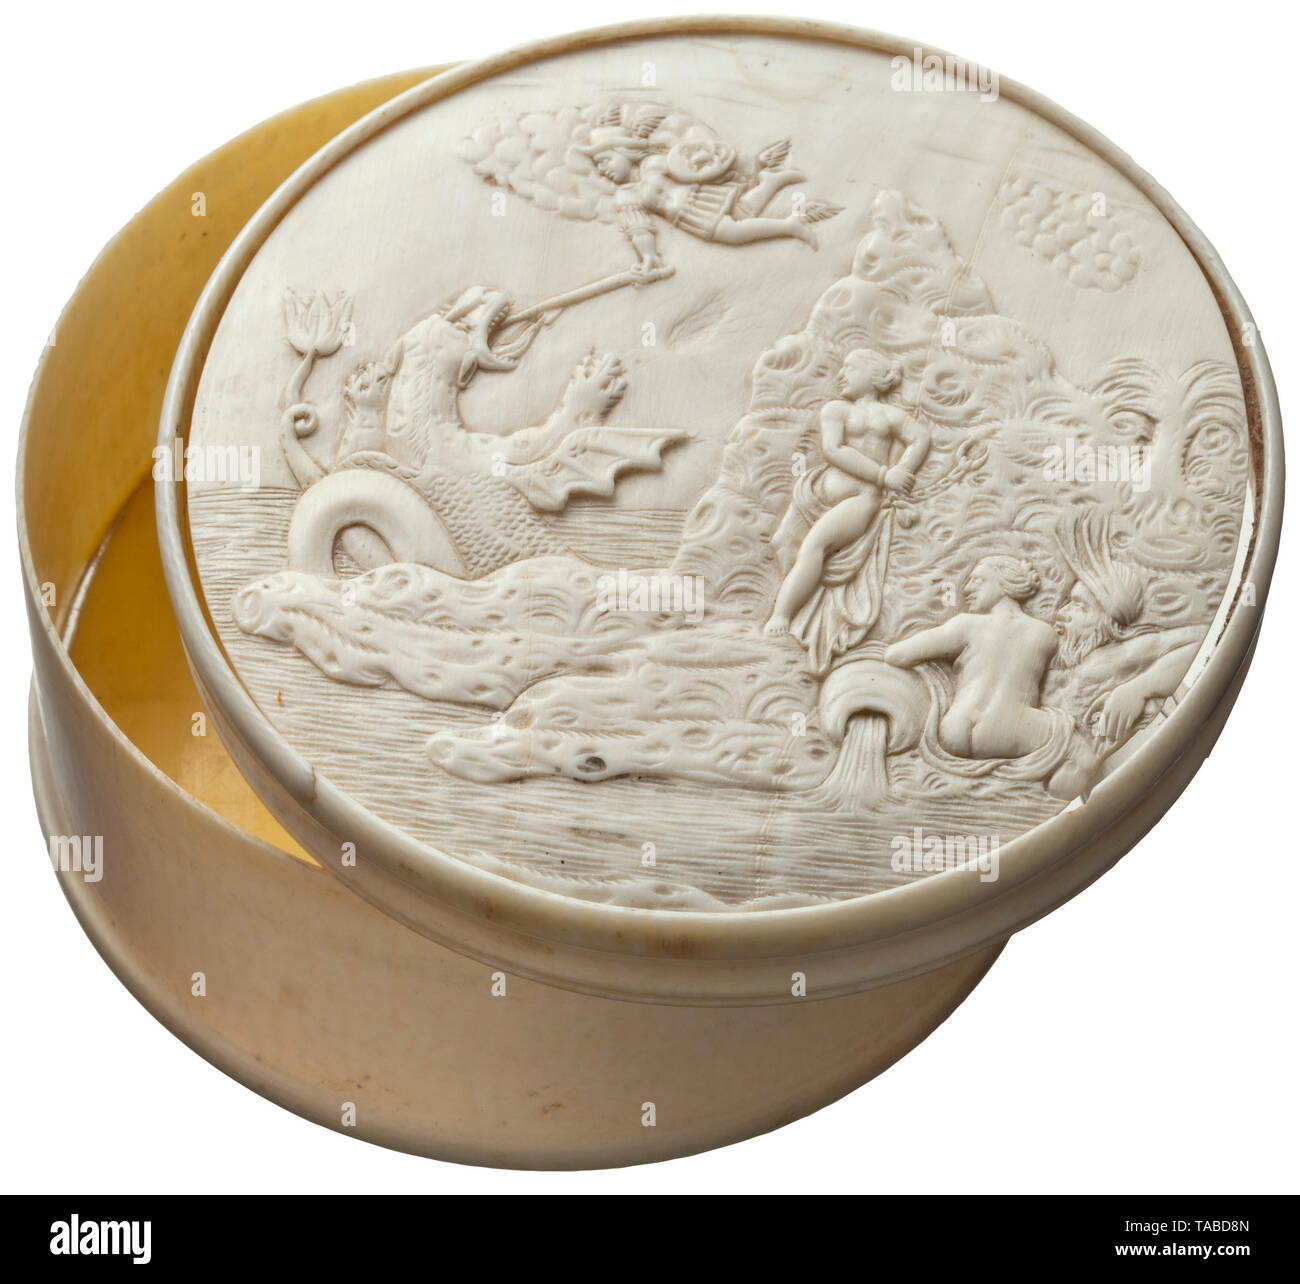 A German ivory box, circa 1700 Cylindrical body with inserted base, hooded lid, the surface with a depiction of Perseus and Andromeda in fine relief work, the foreground with the princess chained to a rock next to Perseus in battle with the sea monster Cetus, at right Neptune with a sea nymph. The base with a repaired break, the wall fissured on one side. Height 5.5 cm, diameter 11.2 cm. historic, historical, handicrafts, handcraft, craft, object, objects, stills, clipping, clippings, cut out, cut-out, cut-outs, 18th century, Additional-Rights-Clearance-Info-Not-Available Stock Photo